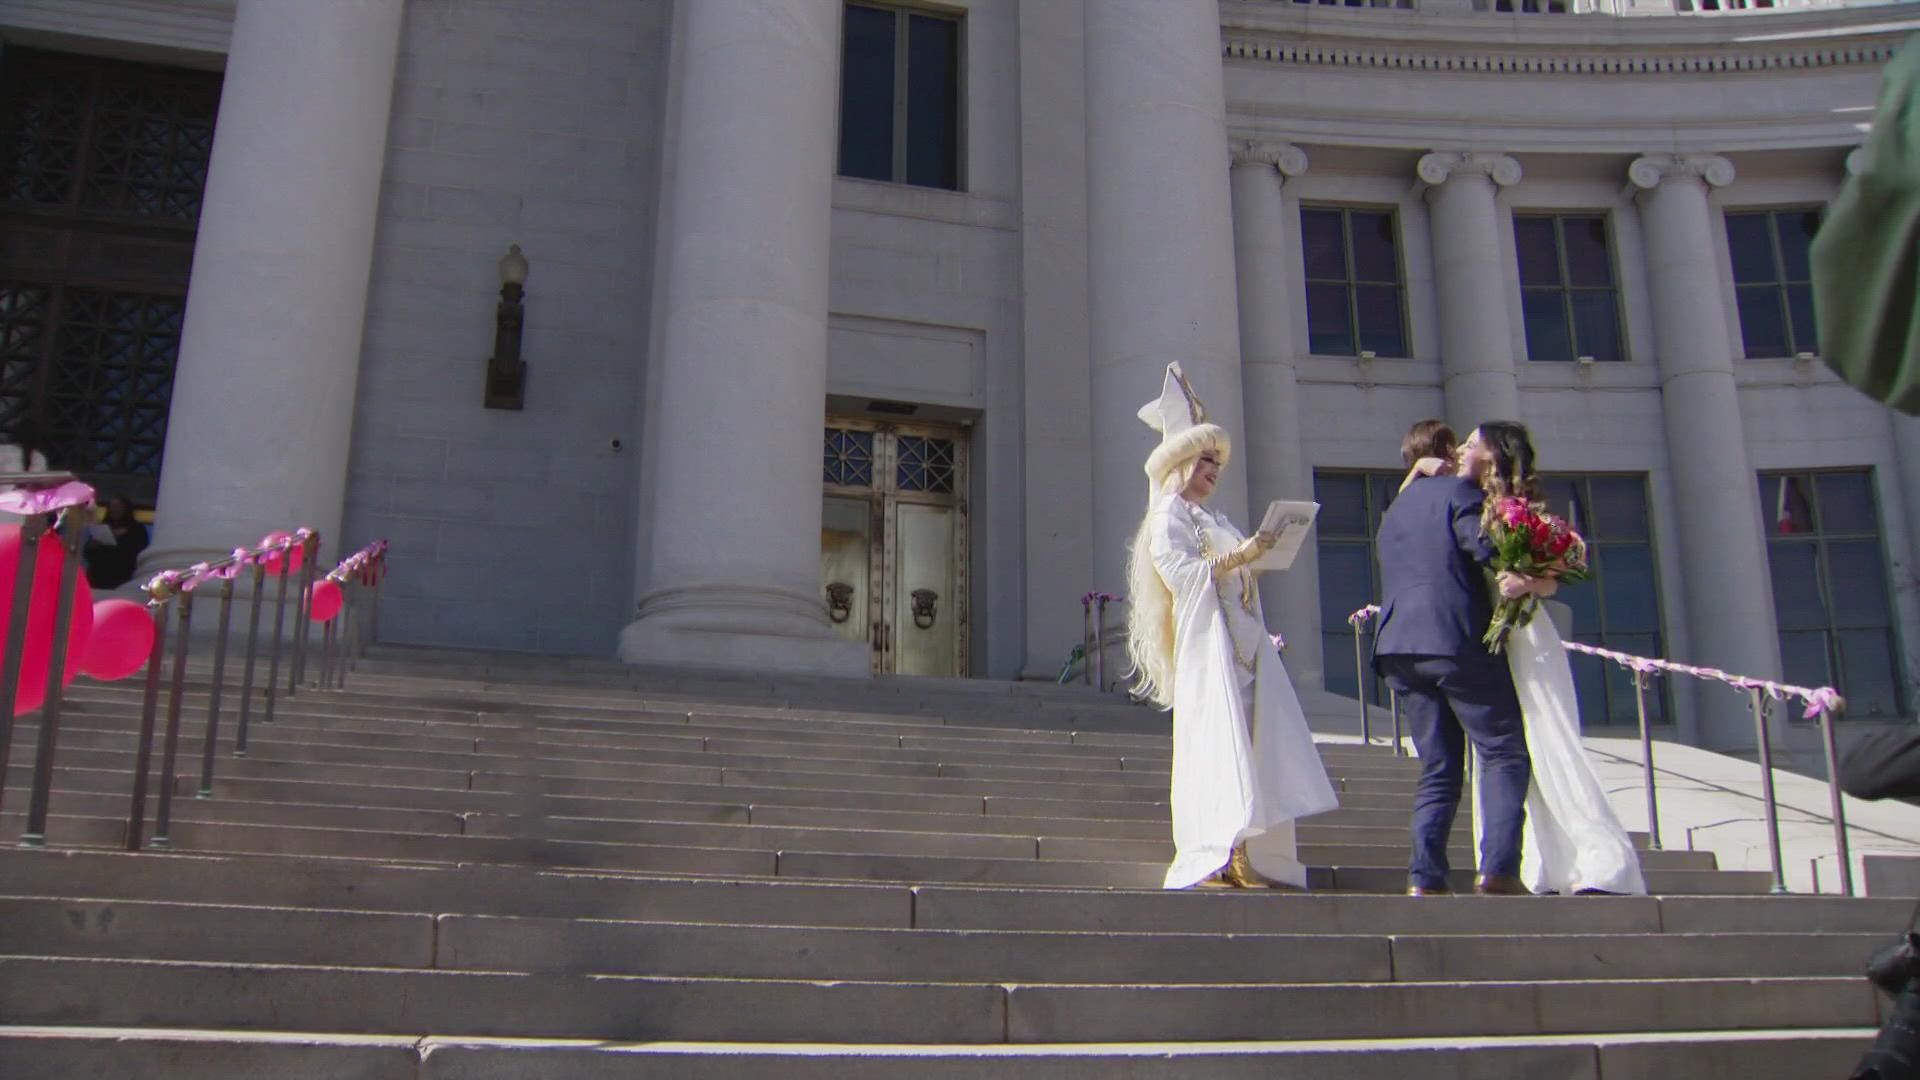 A marathon of sorts started today for 10 couples who took some big steps. They got married on the steps of the Denver city and county building.